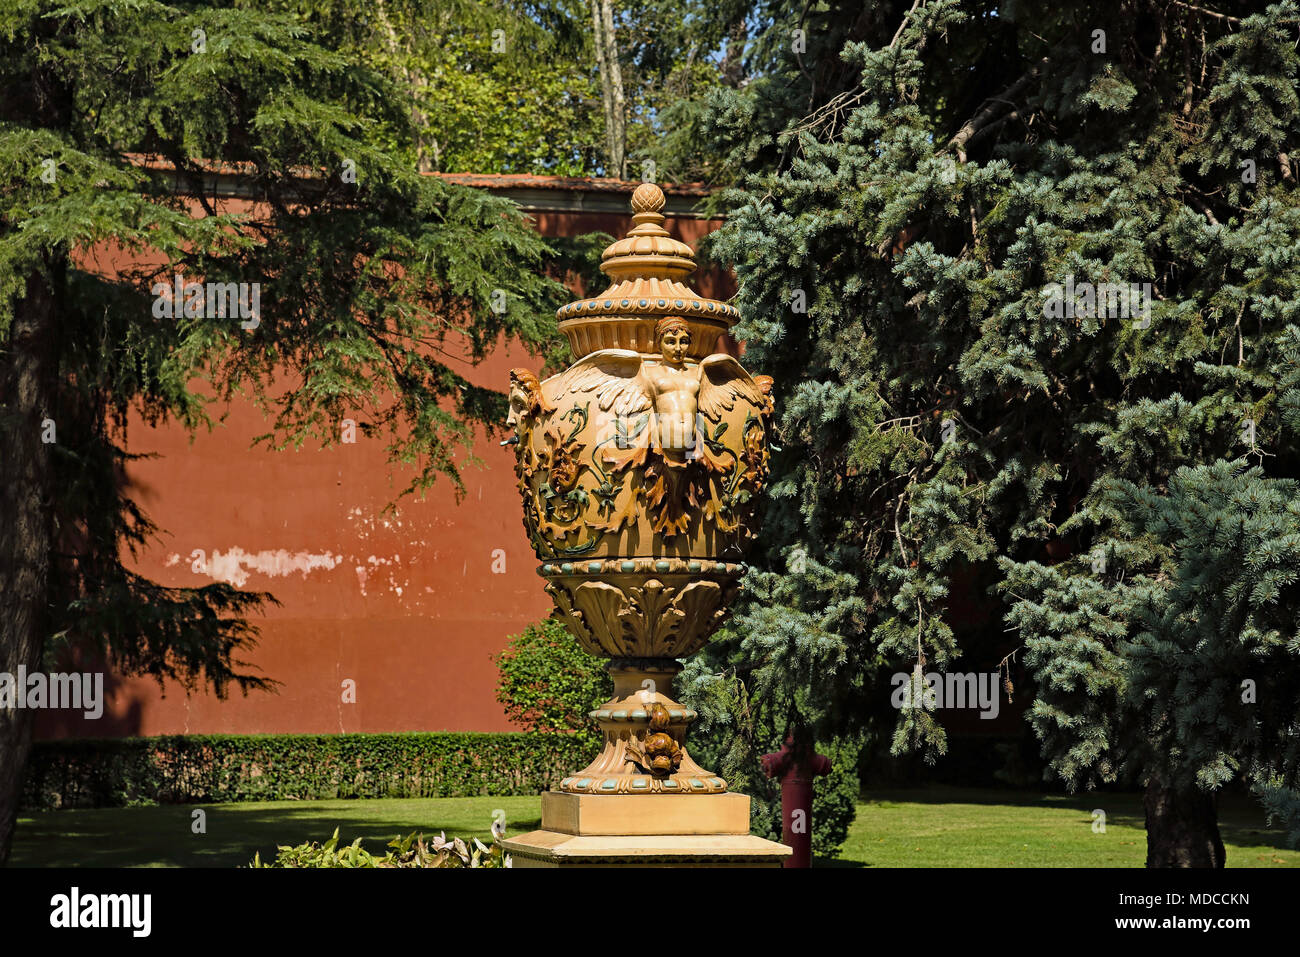 Dolmabahçe Palace lawn ornament, Istanbul, Turkey. One of the many kinds of ornaments on palace grounds. Stock Photo